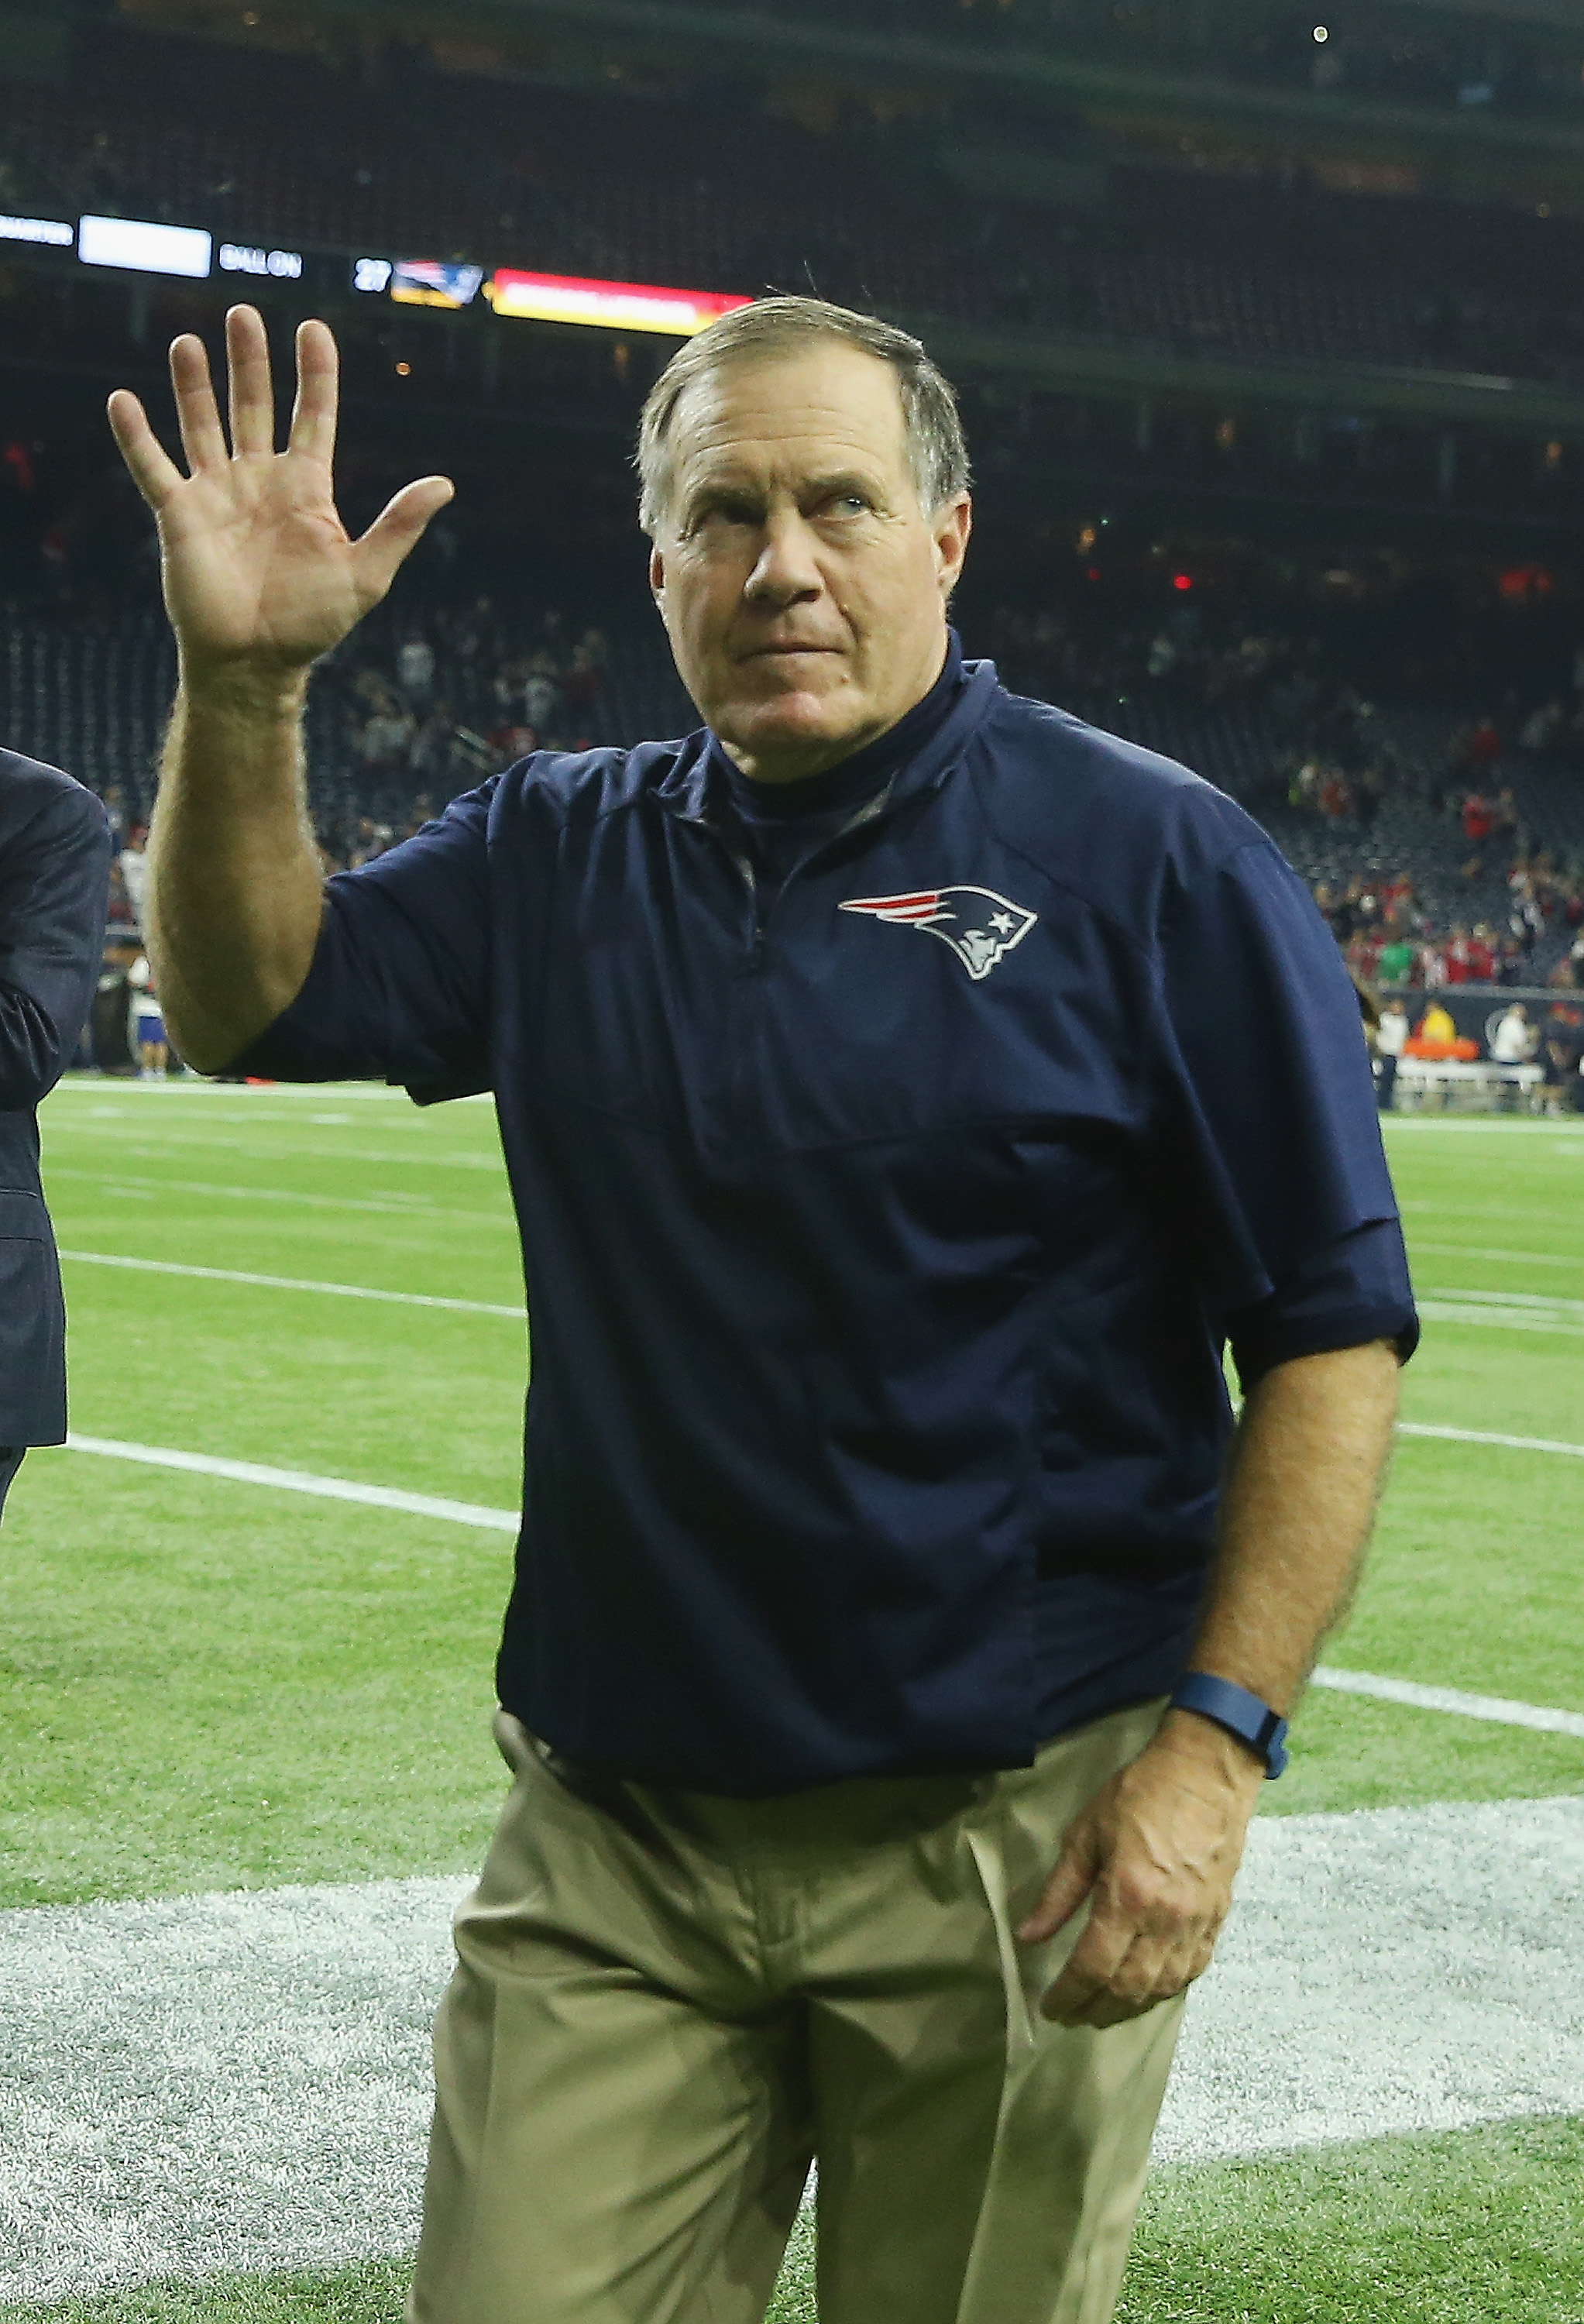 What unspeakable evil does this man have planned for the Texans tonight?